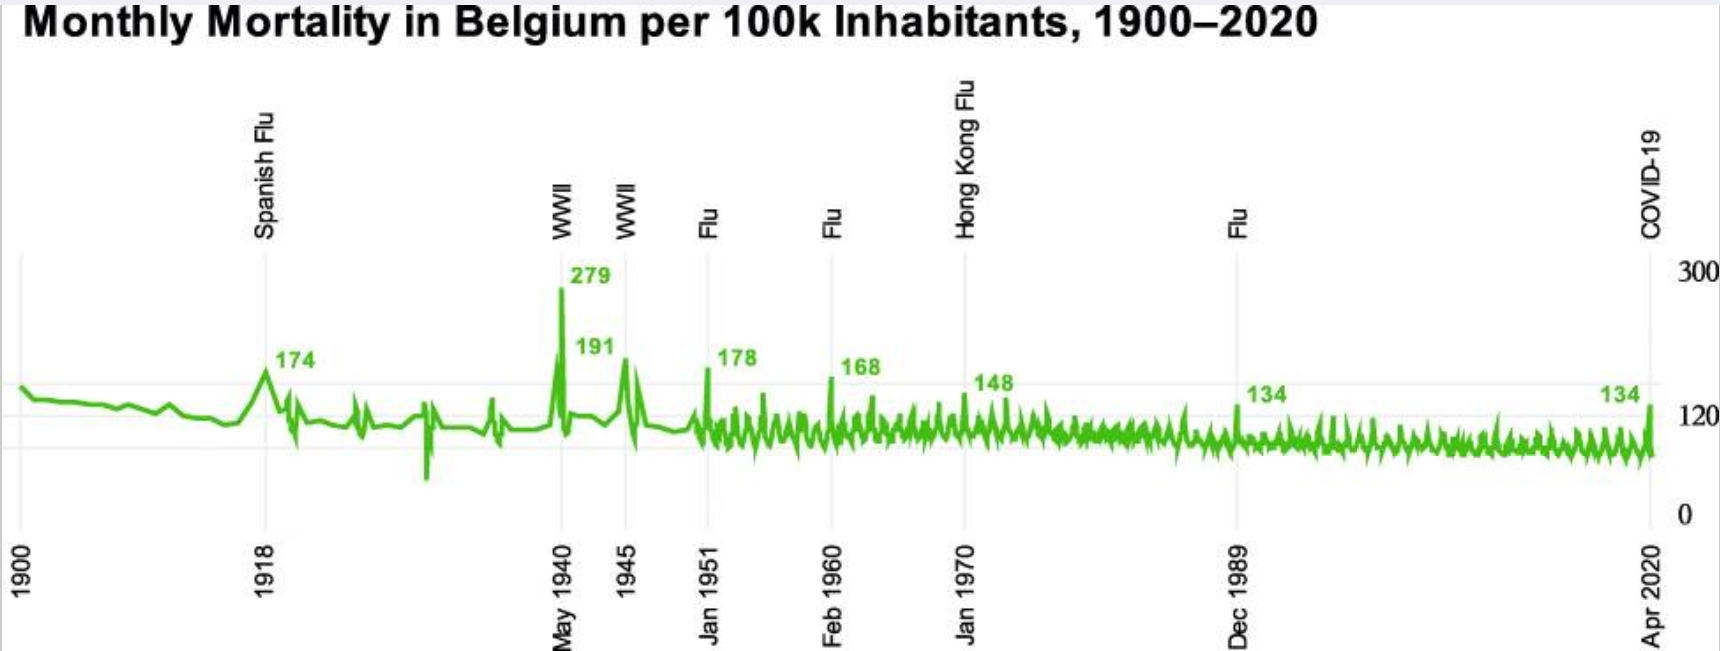 belgium-monthly-mortality-1900.png